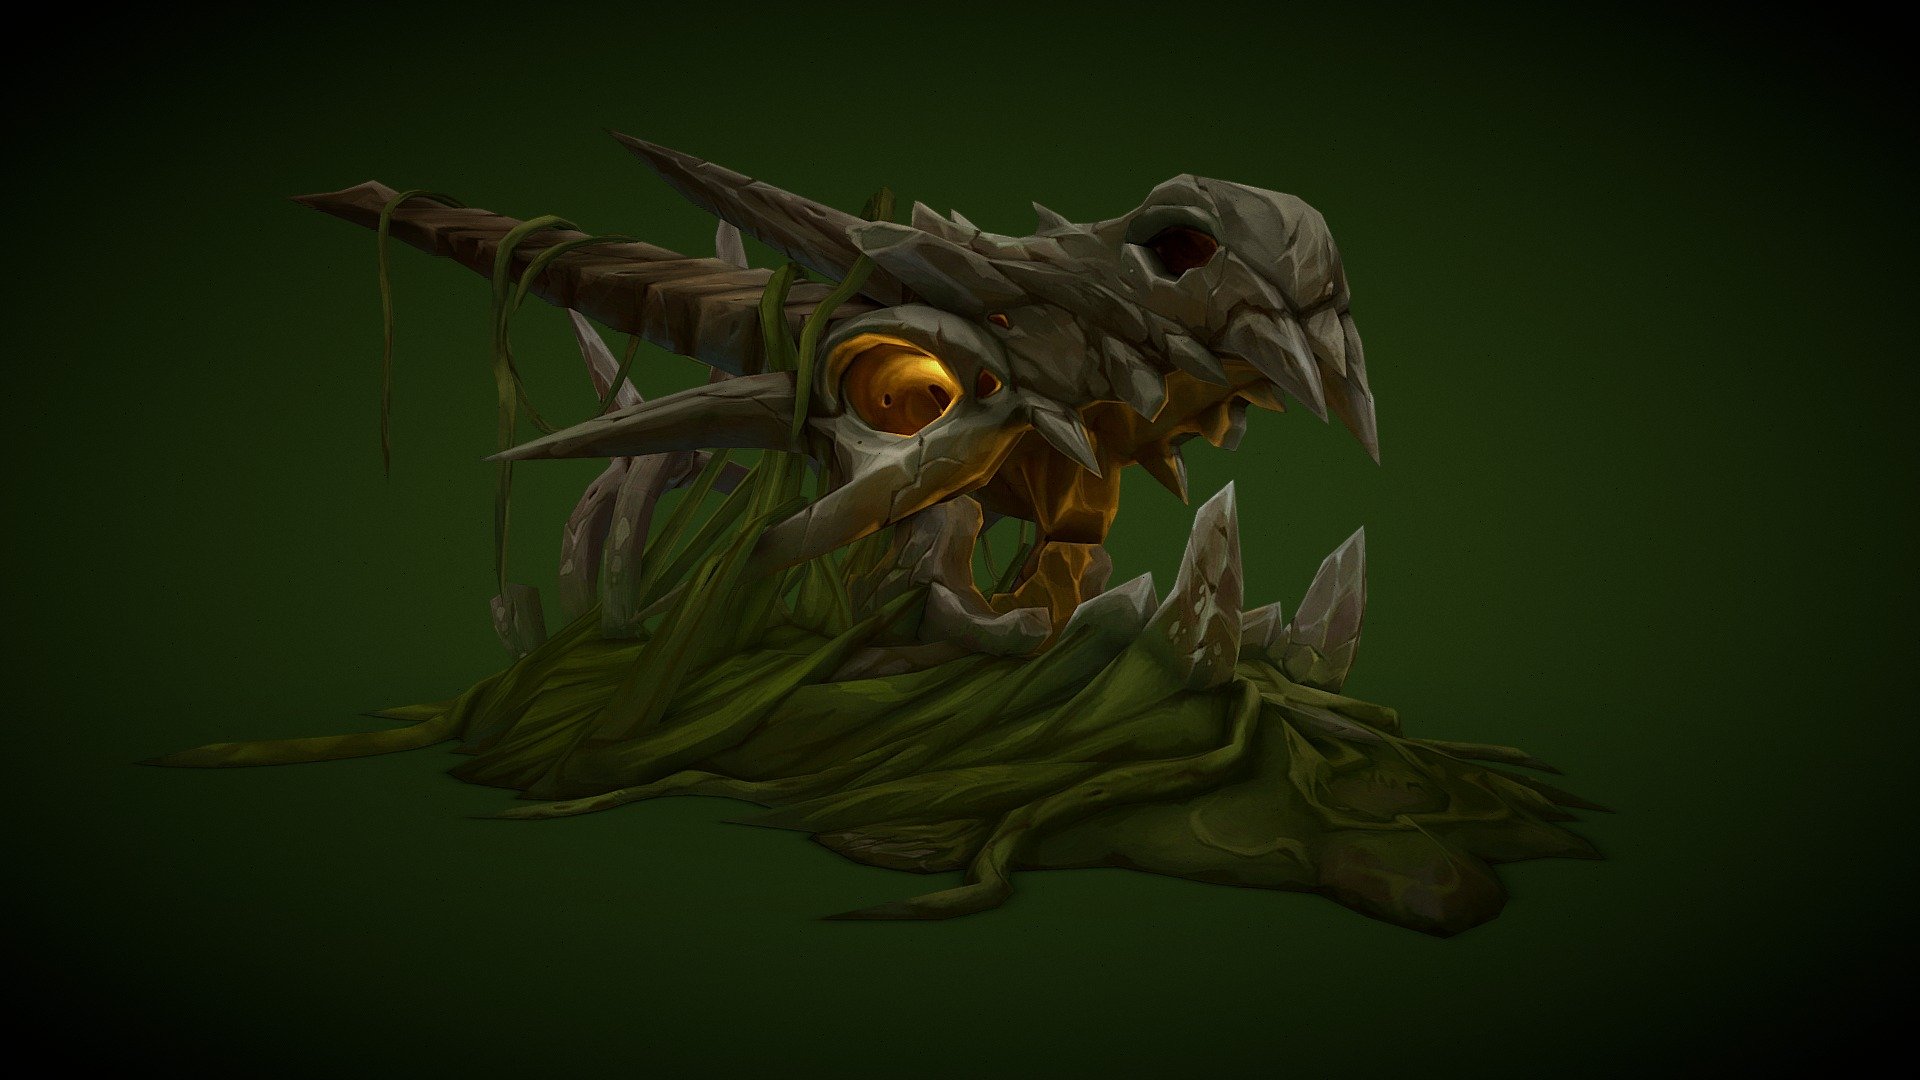 Swamp Dragon Skull

Mobile game asset.
Entrance to a temporary location.
6k tris.
Hand Painted 3d model